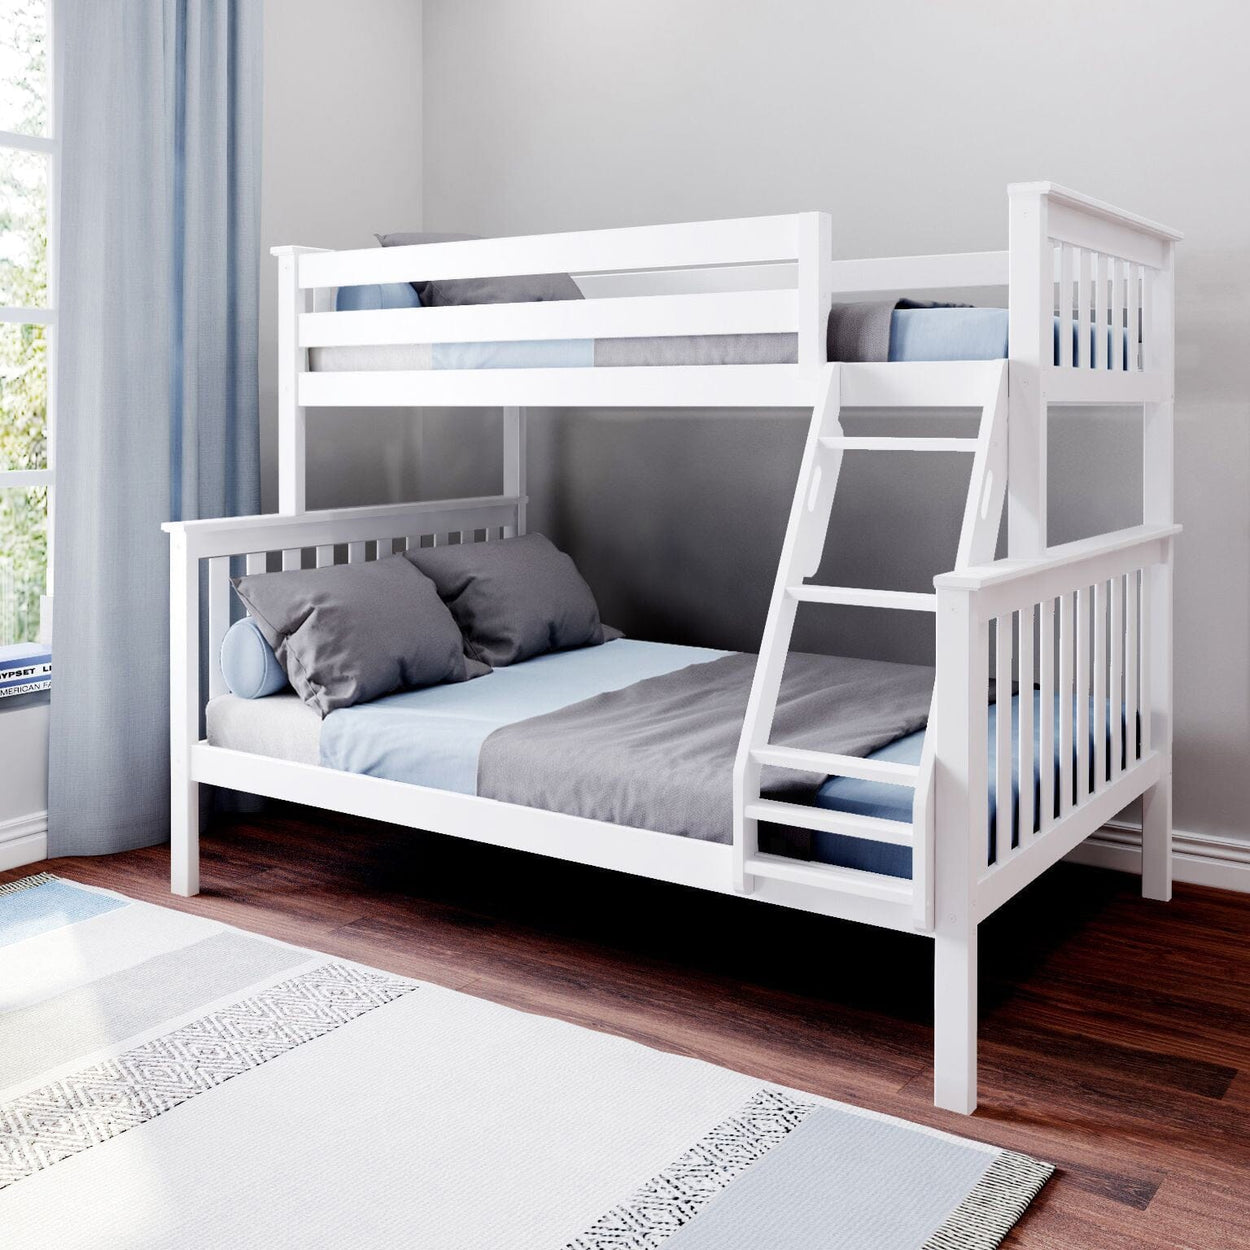 180231-002 : Bunk Beds Classic Twin over Full Bunk Bed, White